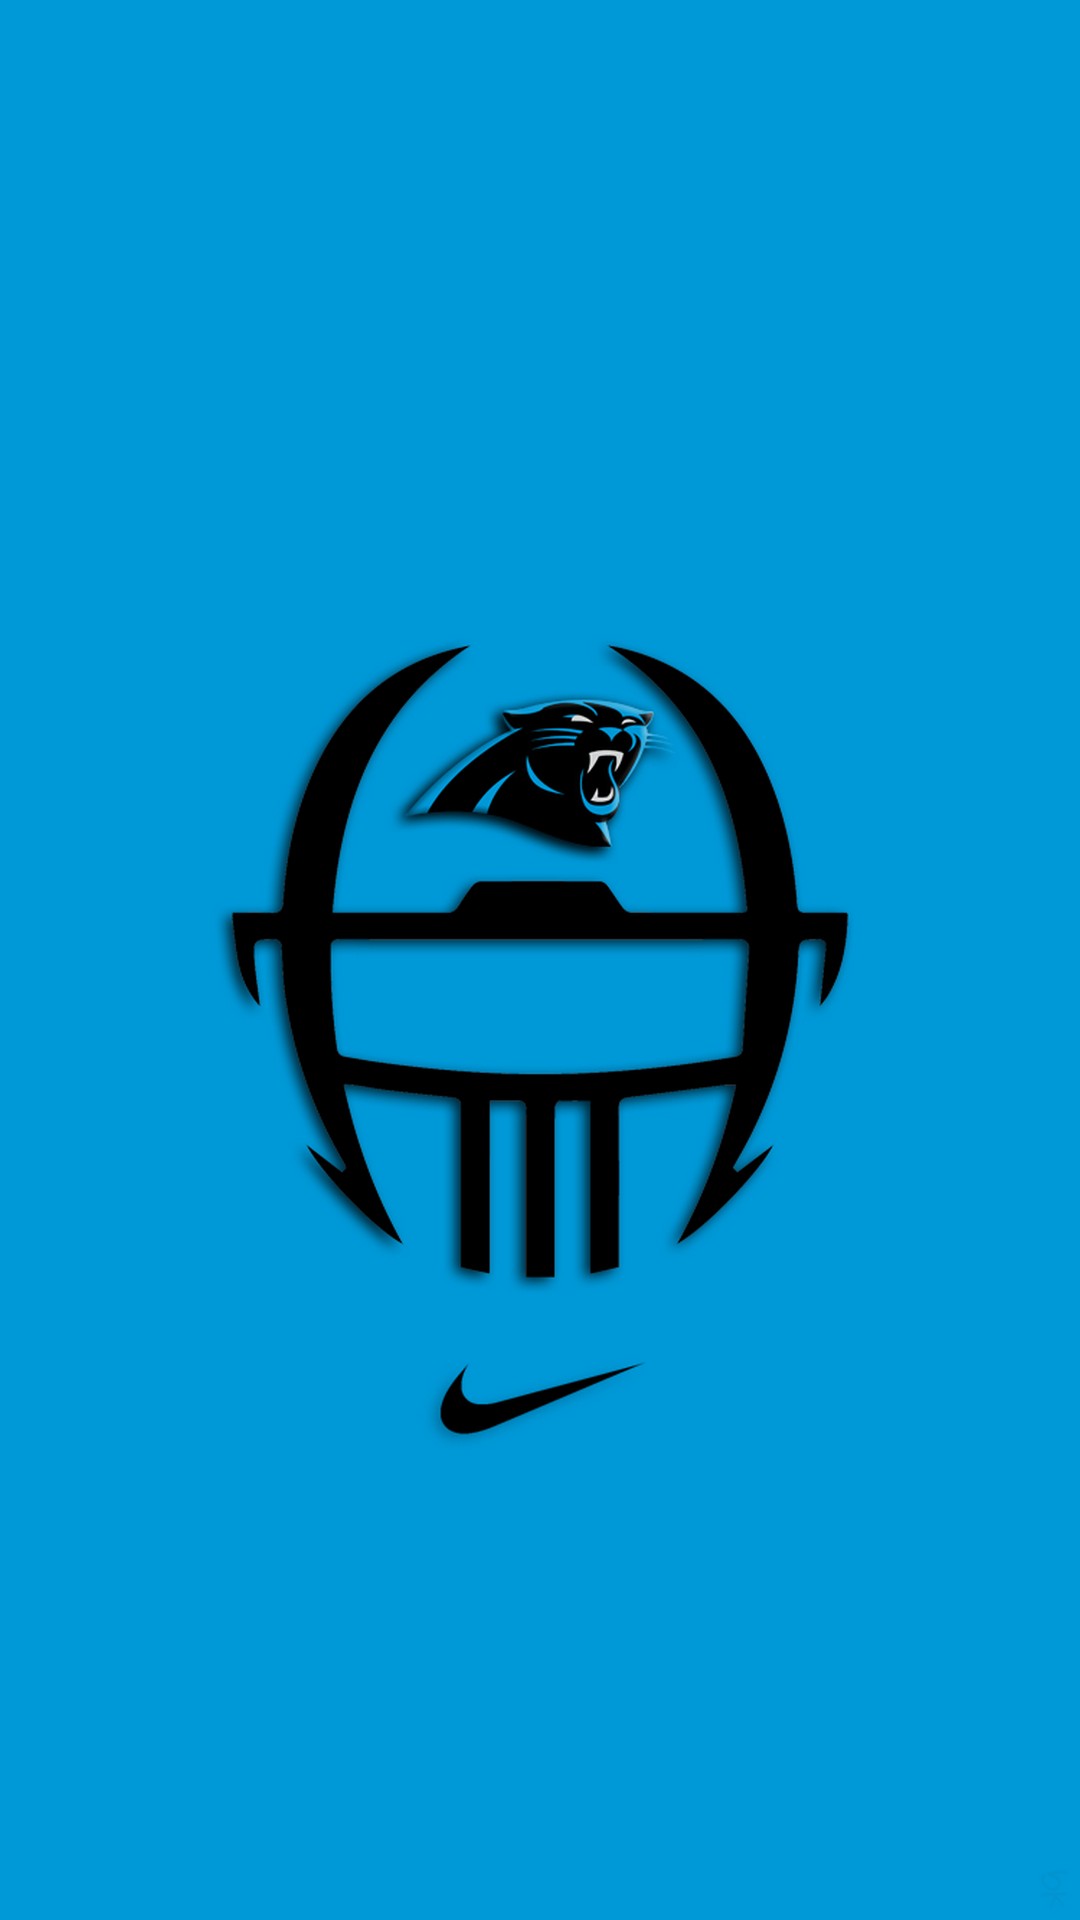 Carolina Panthers iPhone Backgrounds with high-resolution 1080x1920 pixel. Download and set as wallpaper for Apple iPhone X, XS Max, XR, 8, 7, 6, SE, iPad, Android